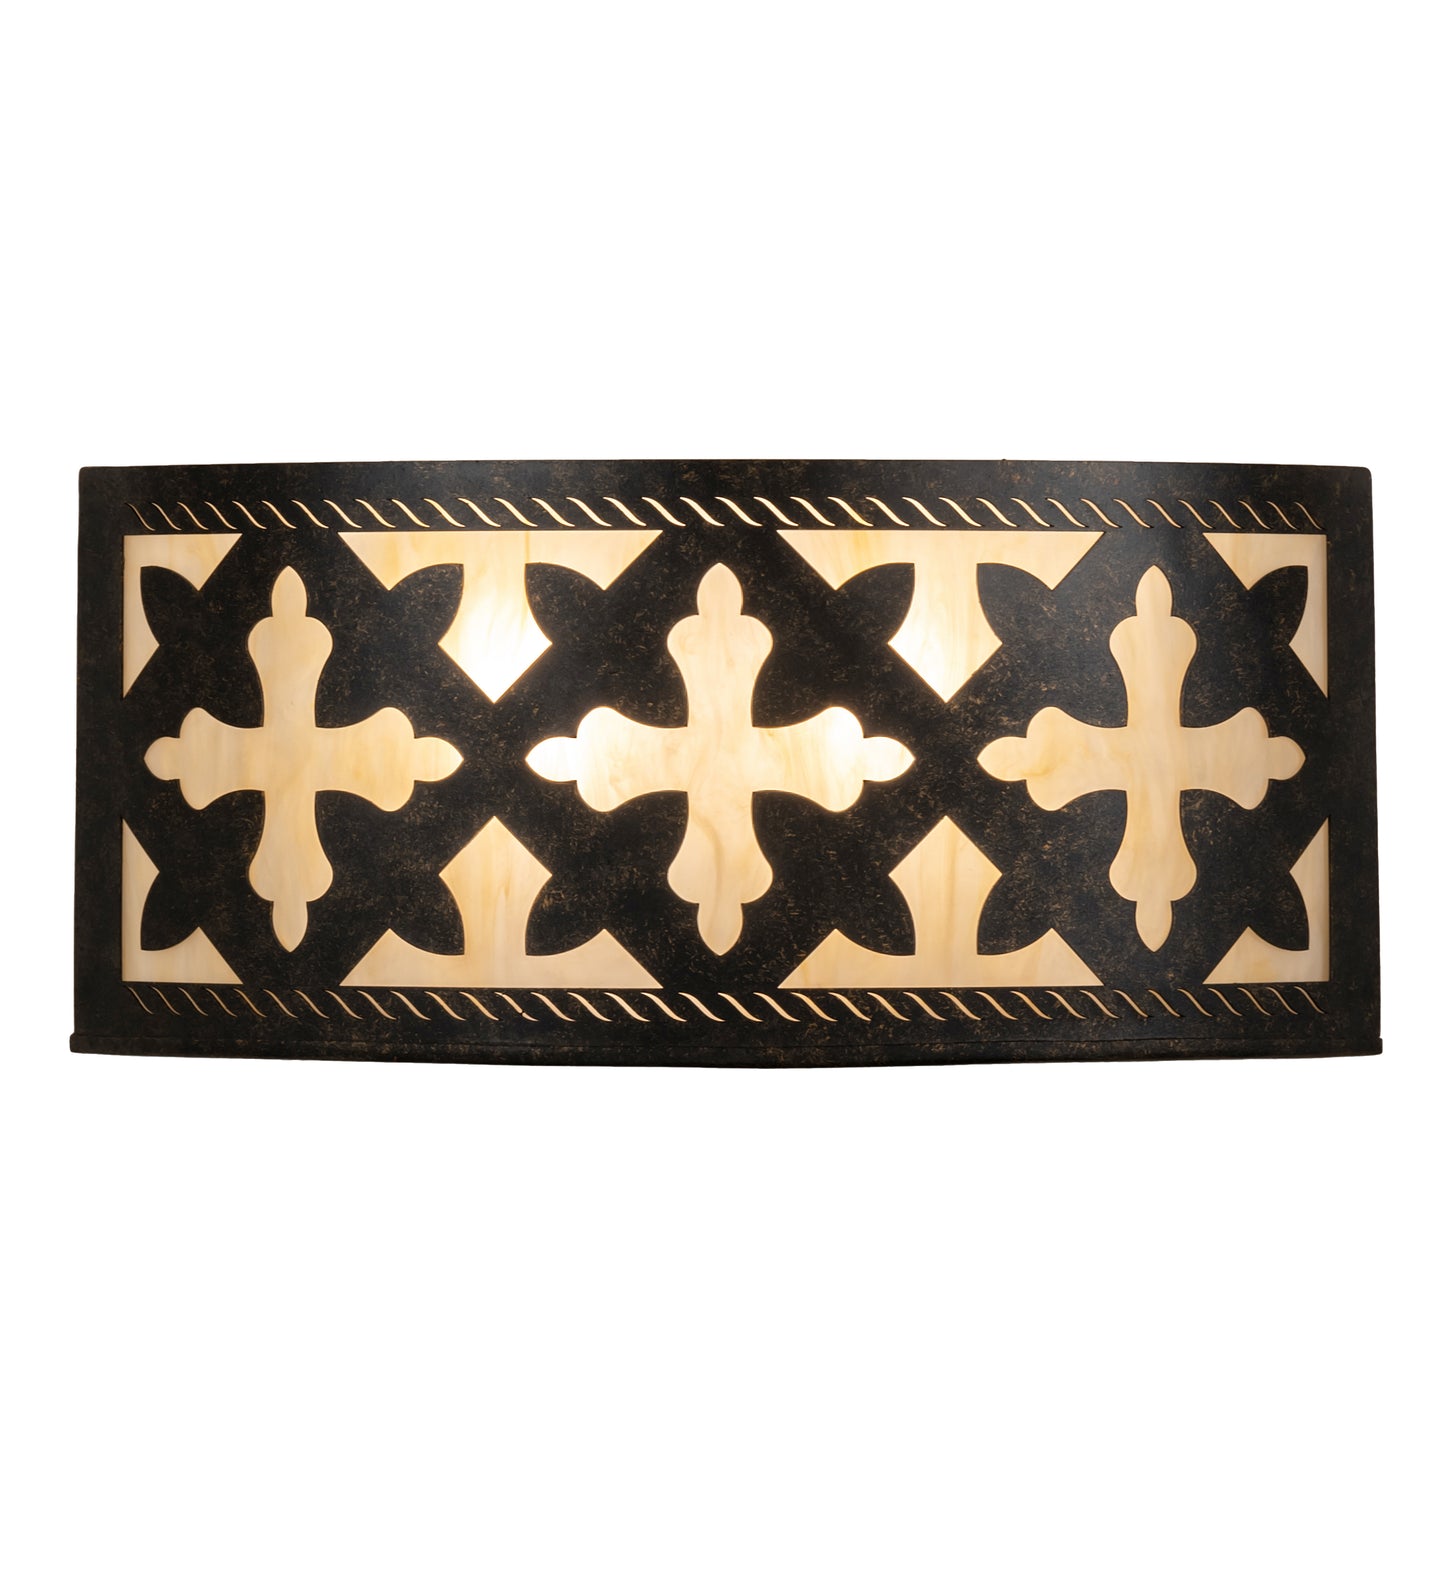 2nd Avenue 18" Cardiff Wall Sconce